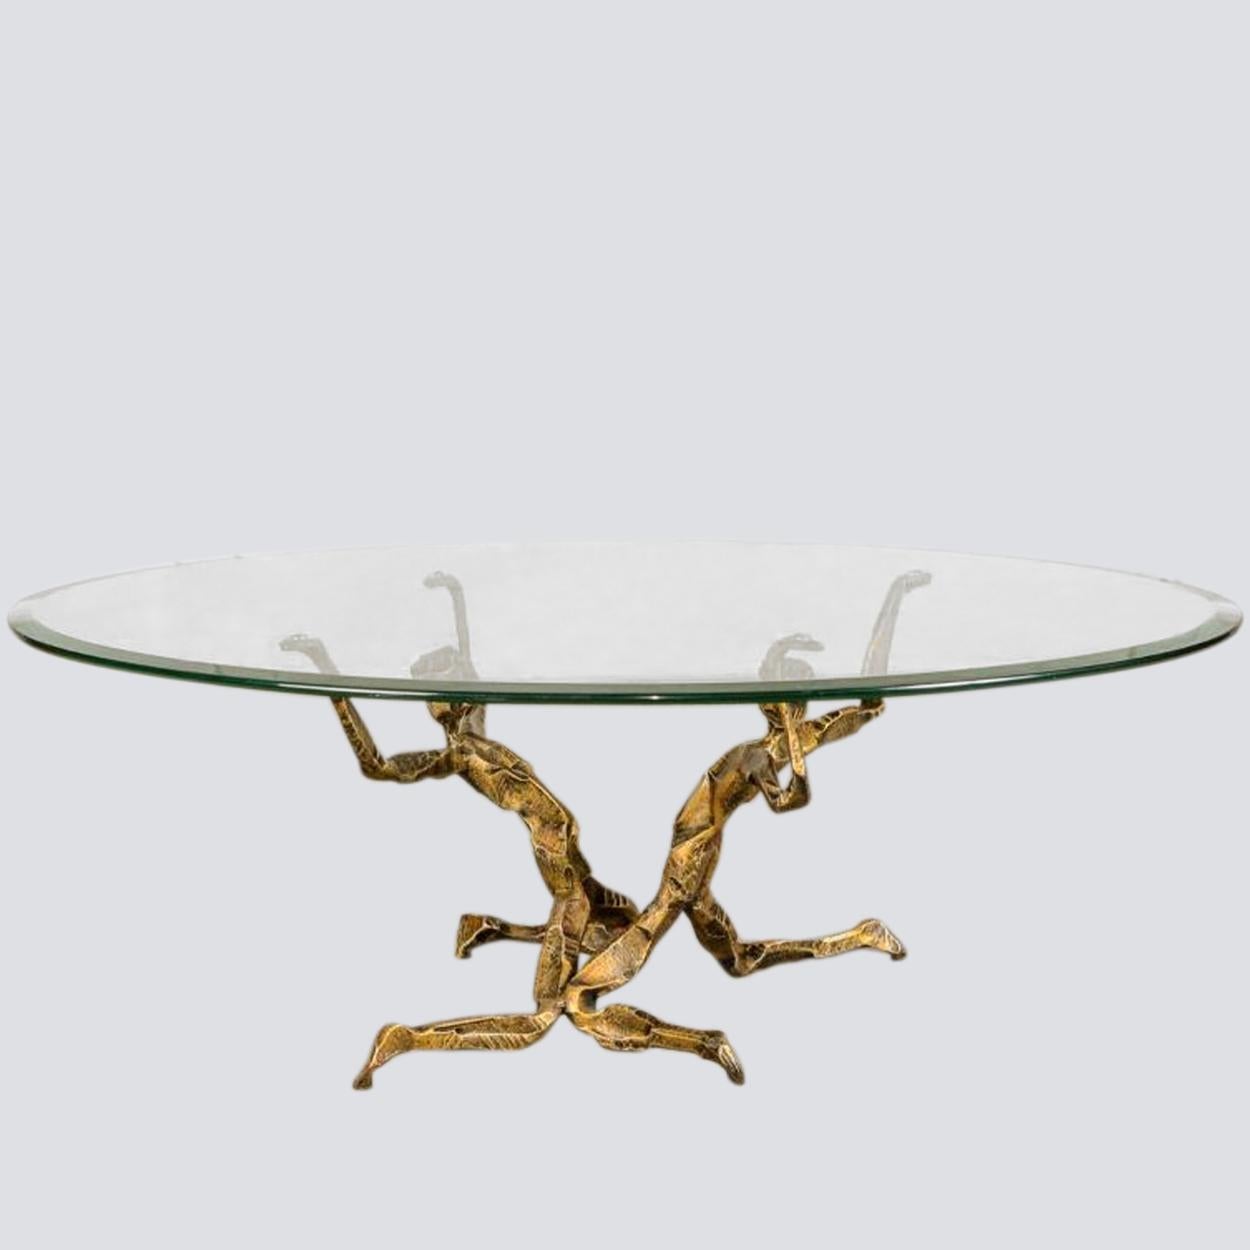 Brass Brutalist Style Coffee Table Gilded Wrought Iron, Salvino Marsura, 1960s